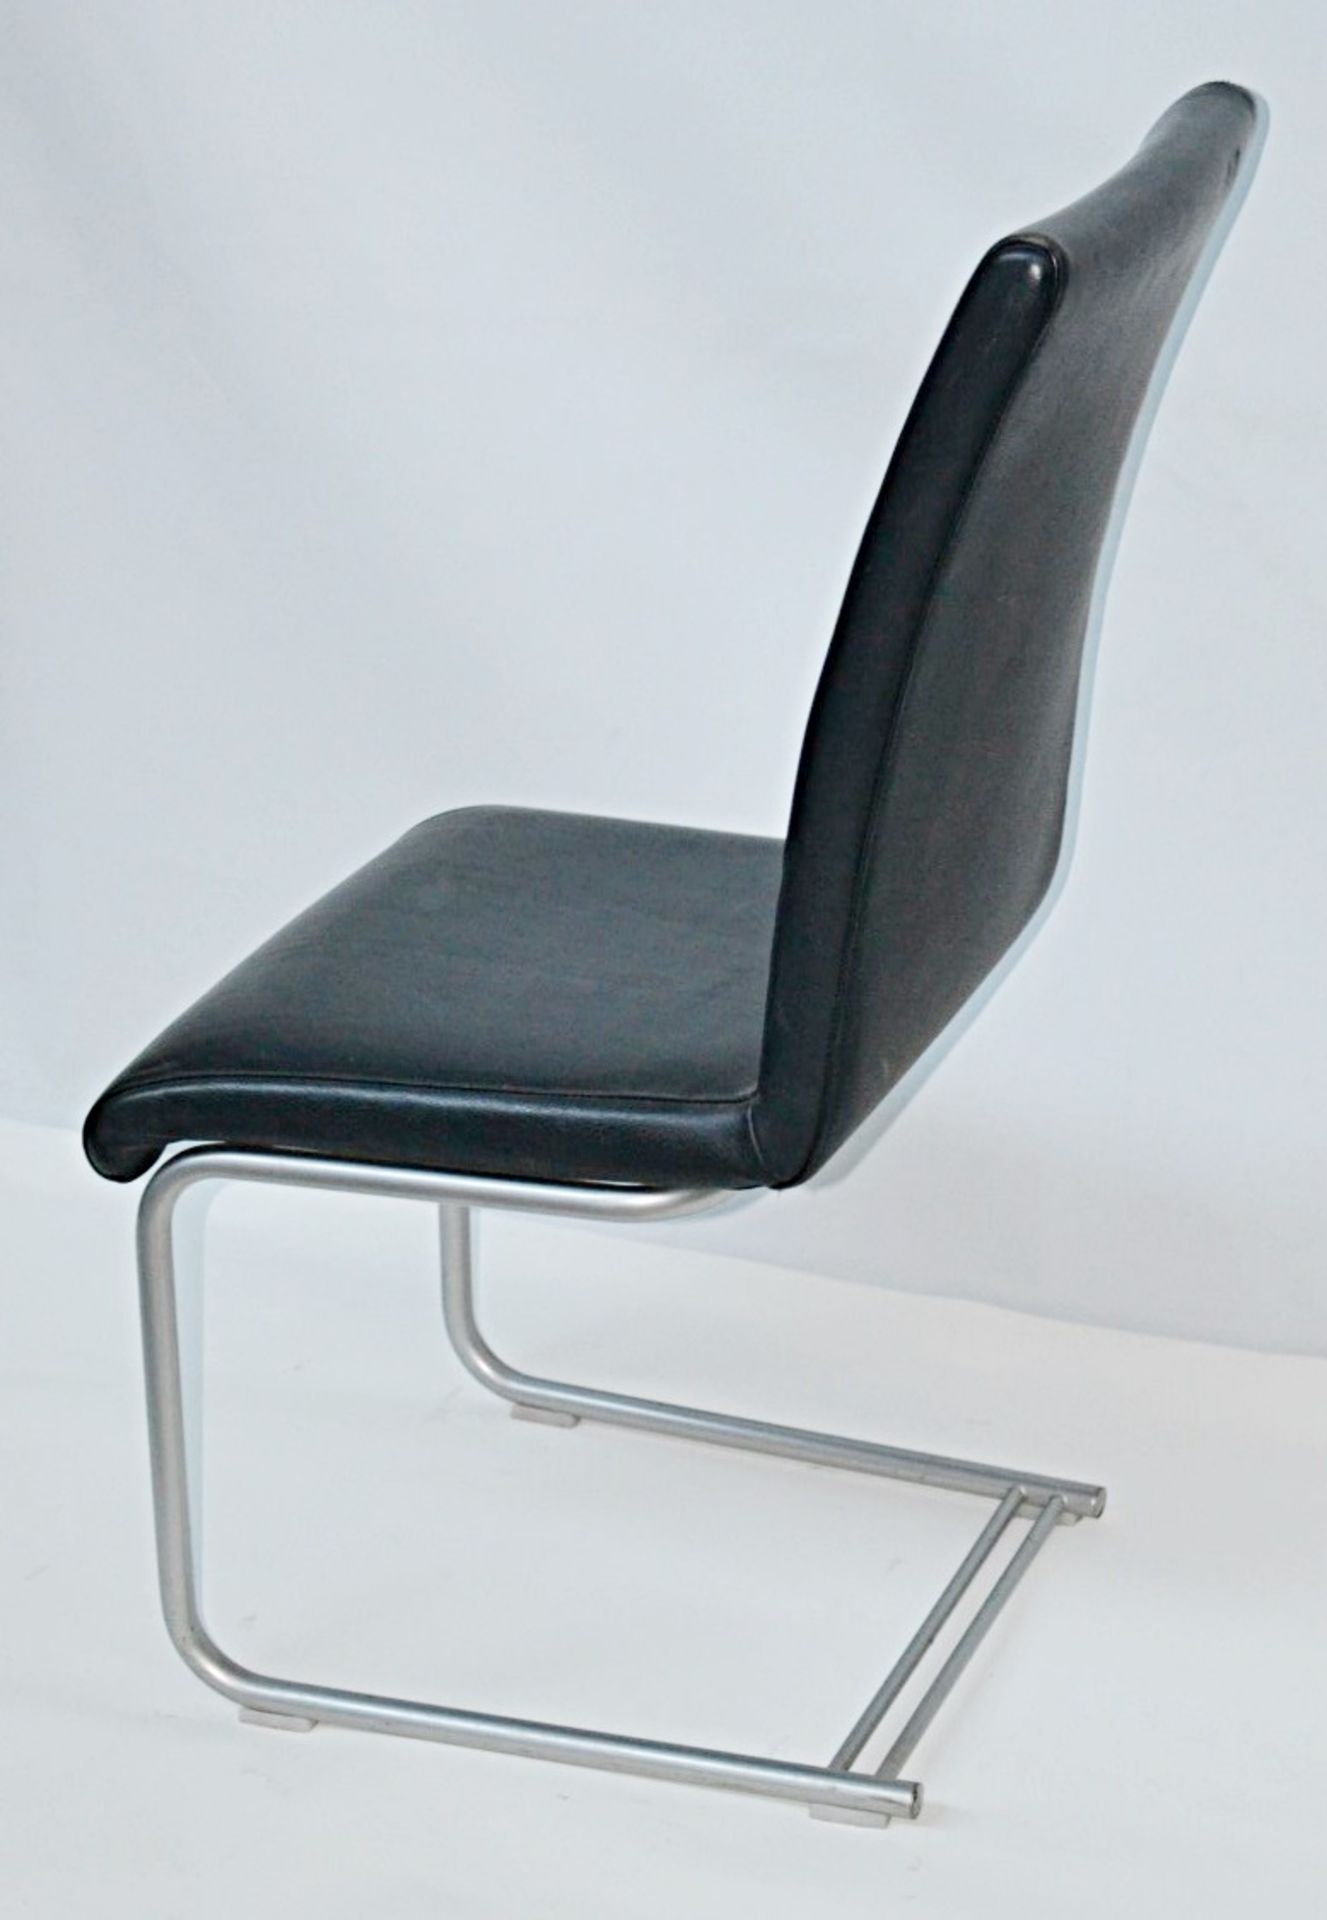 6 x Matching VENJAKOB "Let's Go" Dining Chairs - Expertly Upholstered In Black Leather With Metal Ca - Image 6 of 9